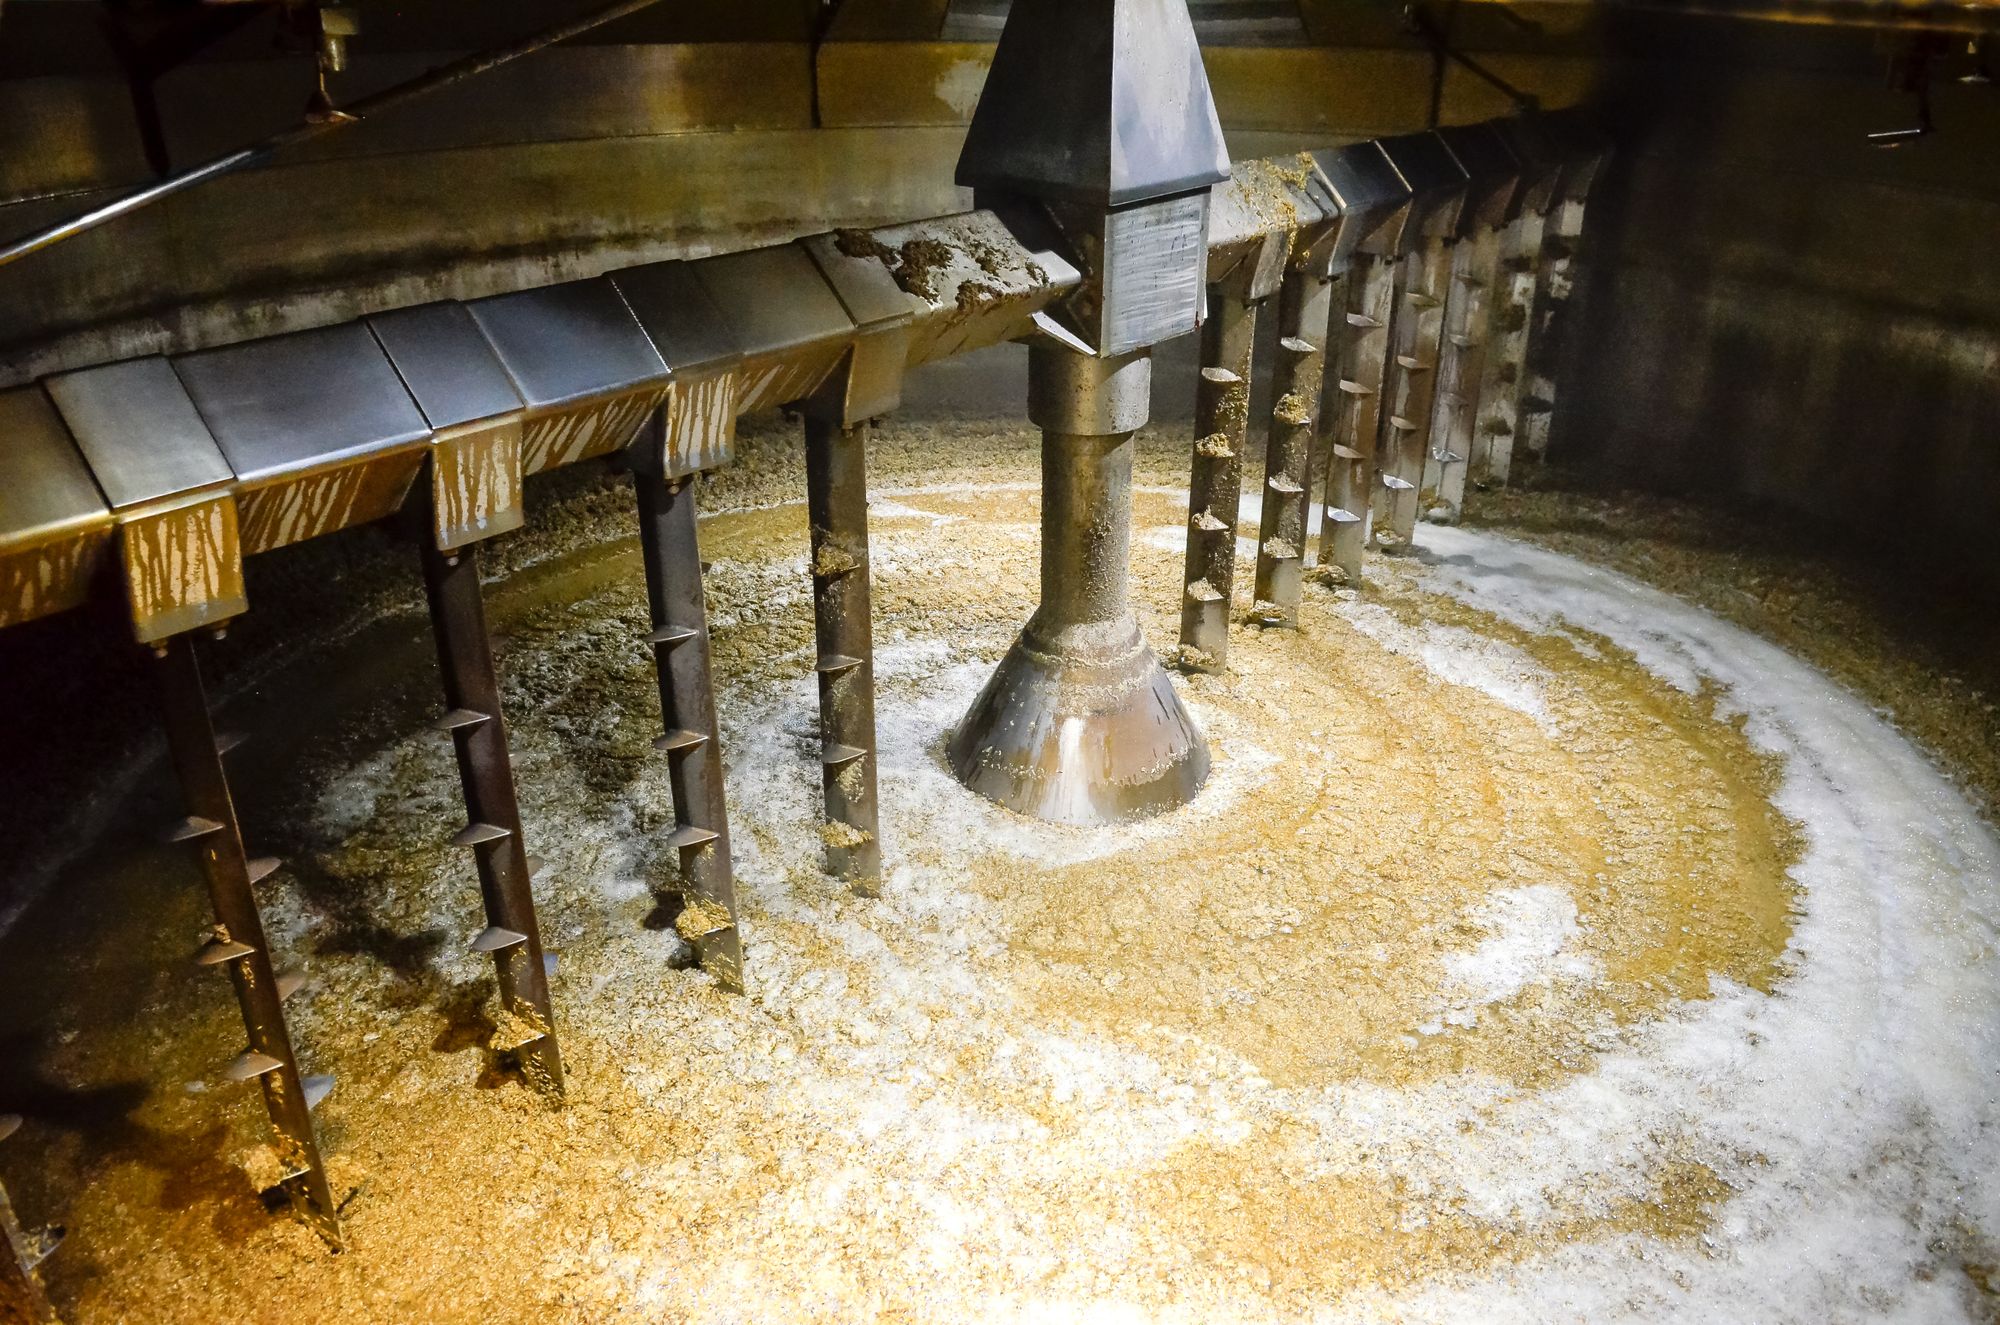 Inside a mash tun during the whisky making process. Photo: Shutterstock